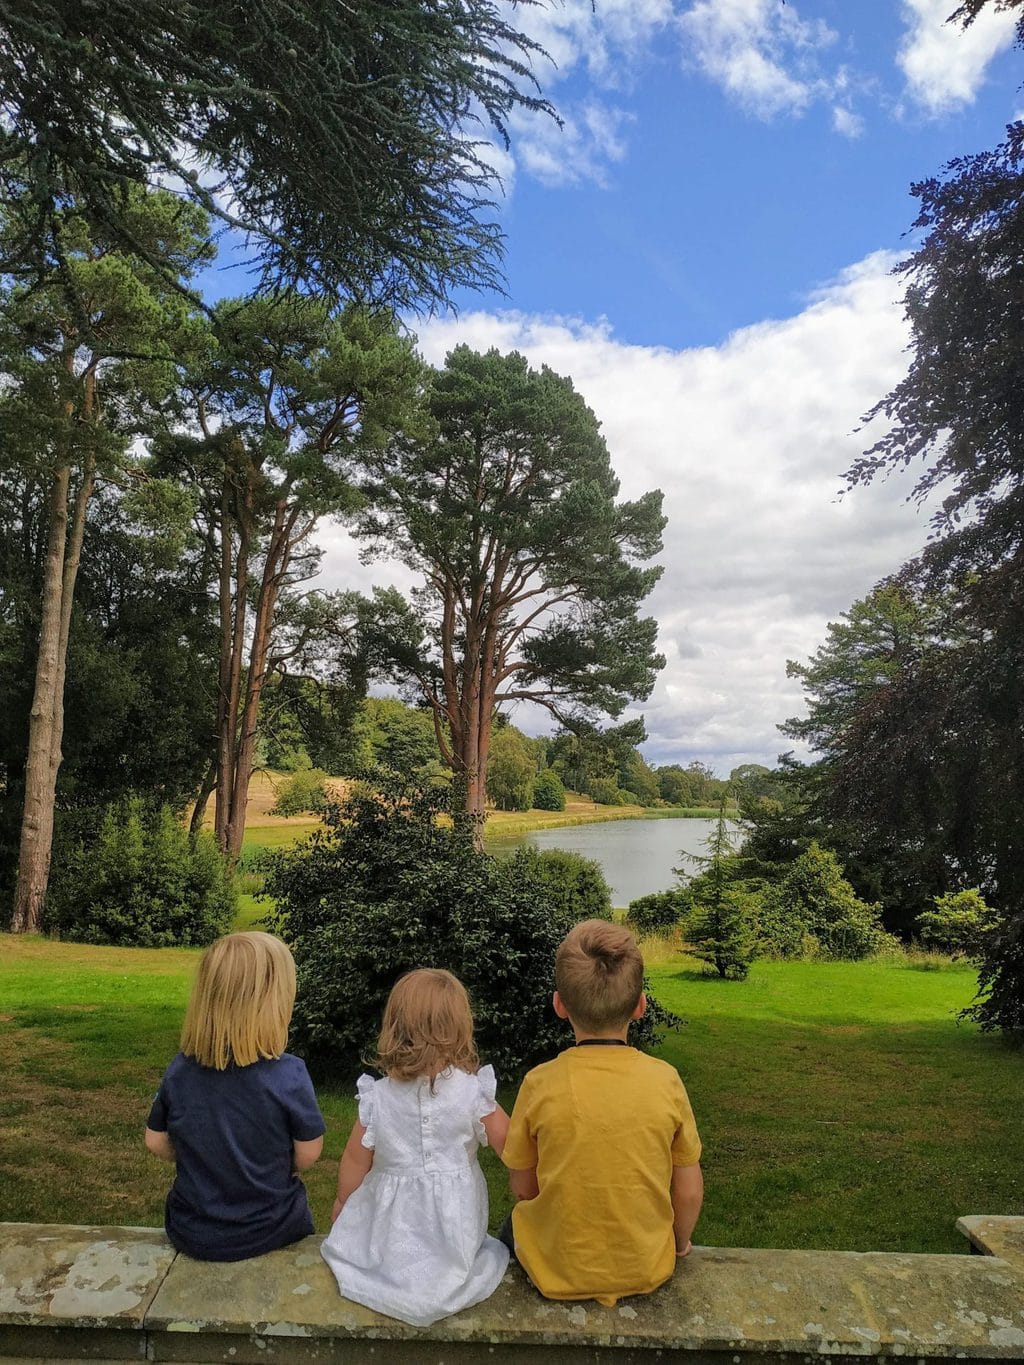 A wonderful family day out to Castle Howard